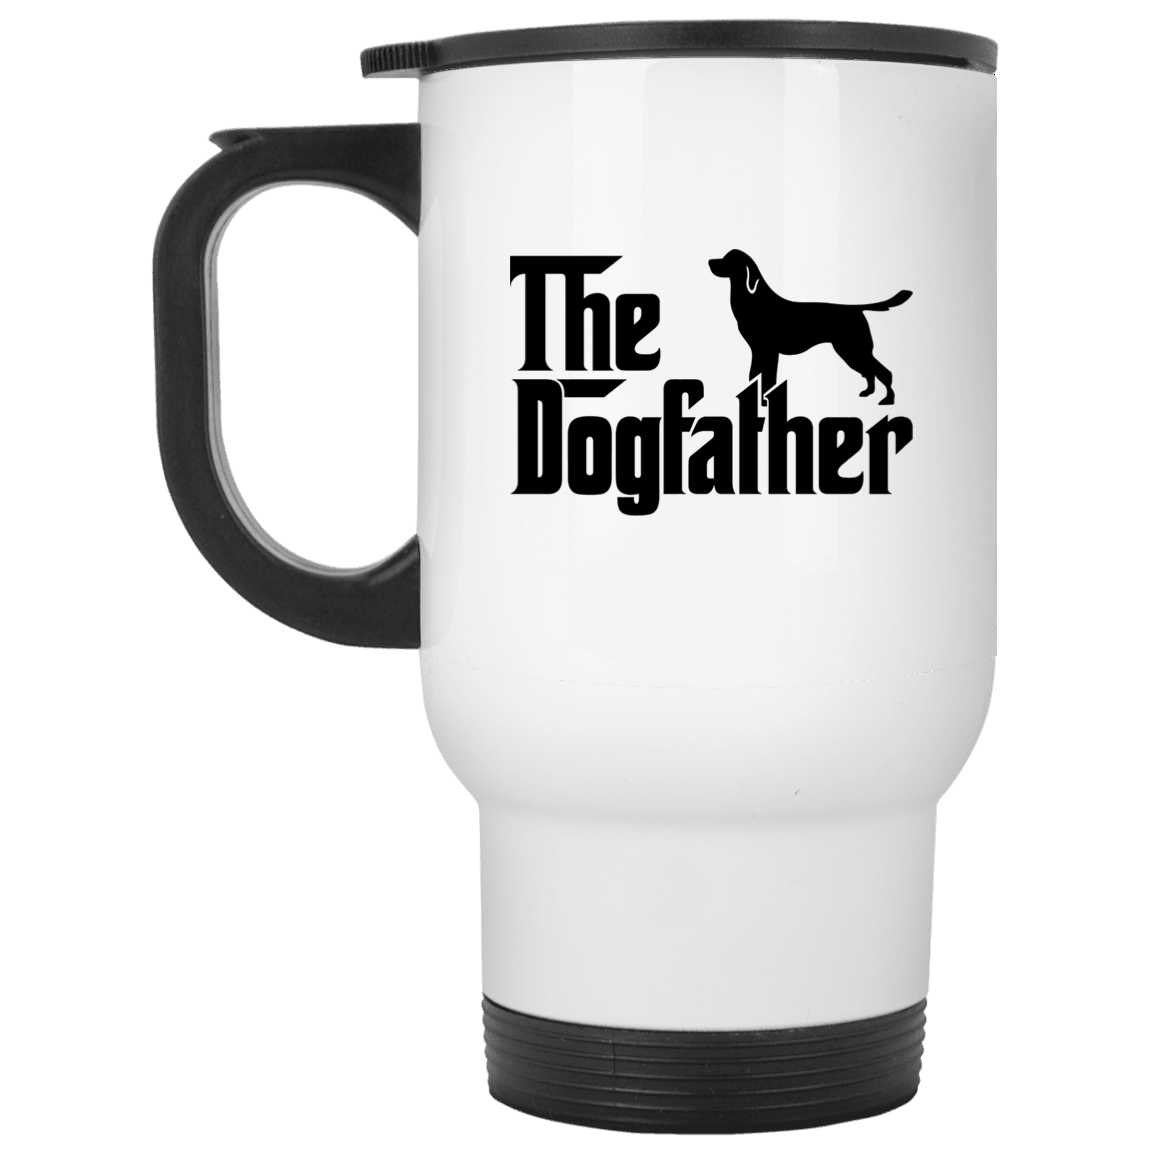 Designs by MyUtopia Shout Out:The Dog Father 14oz Stainless Steel Travel Mug,White / 14 oz,Travel Mug